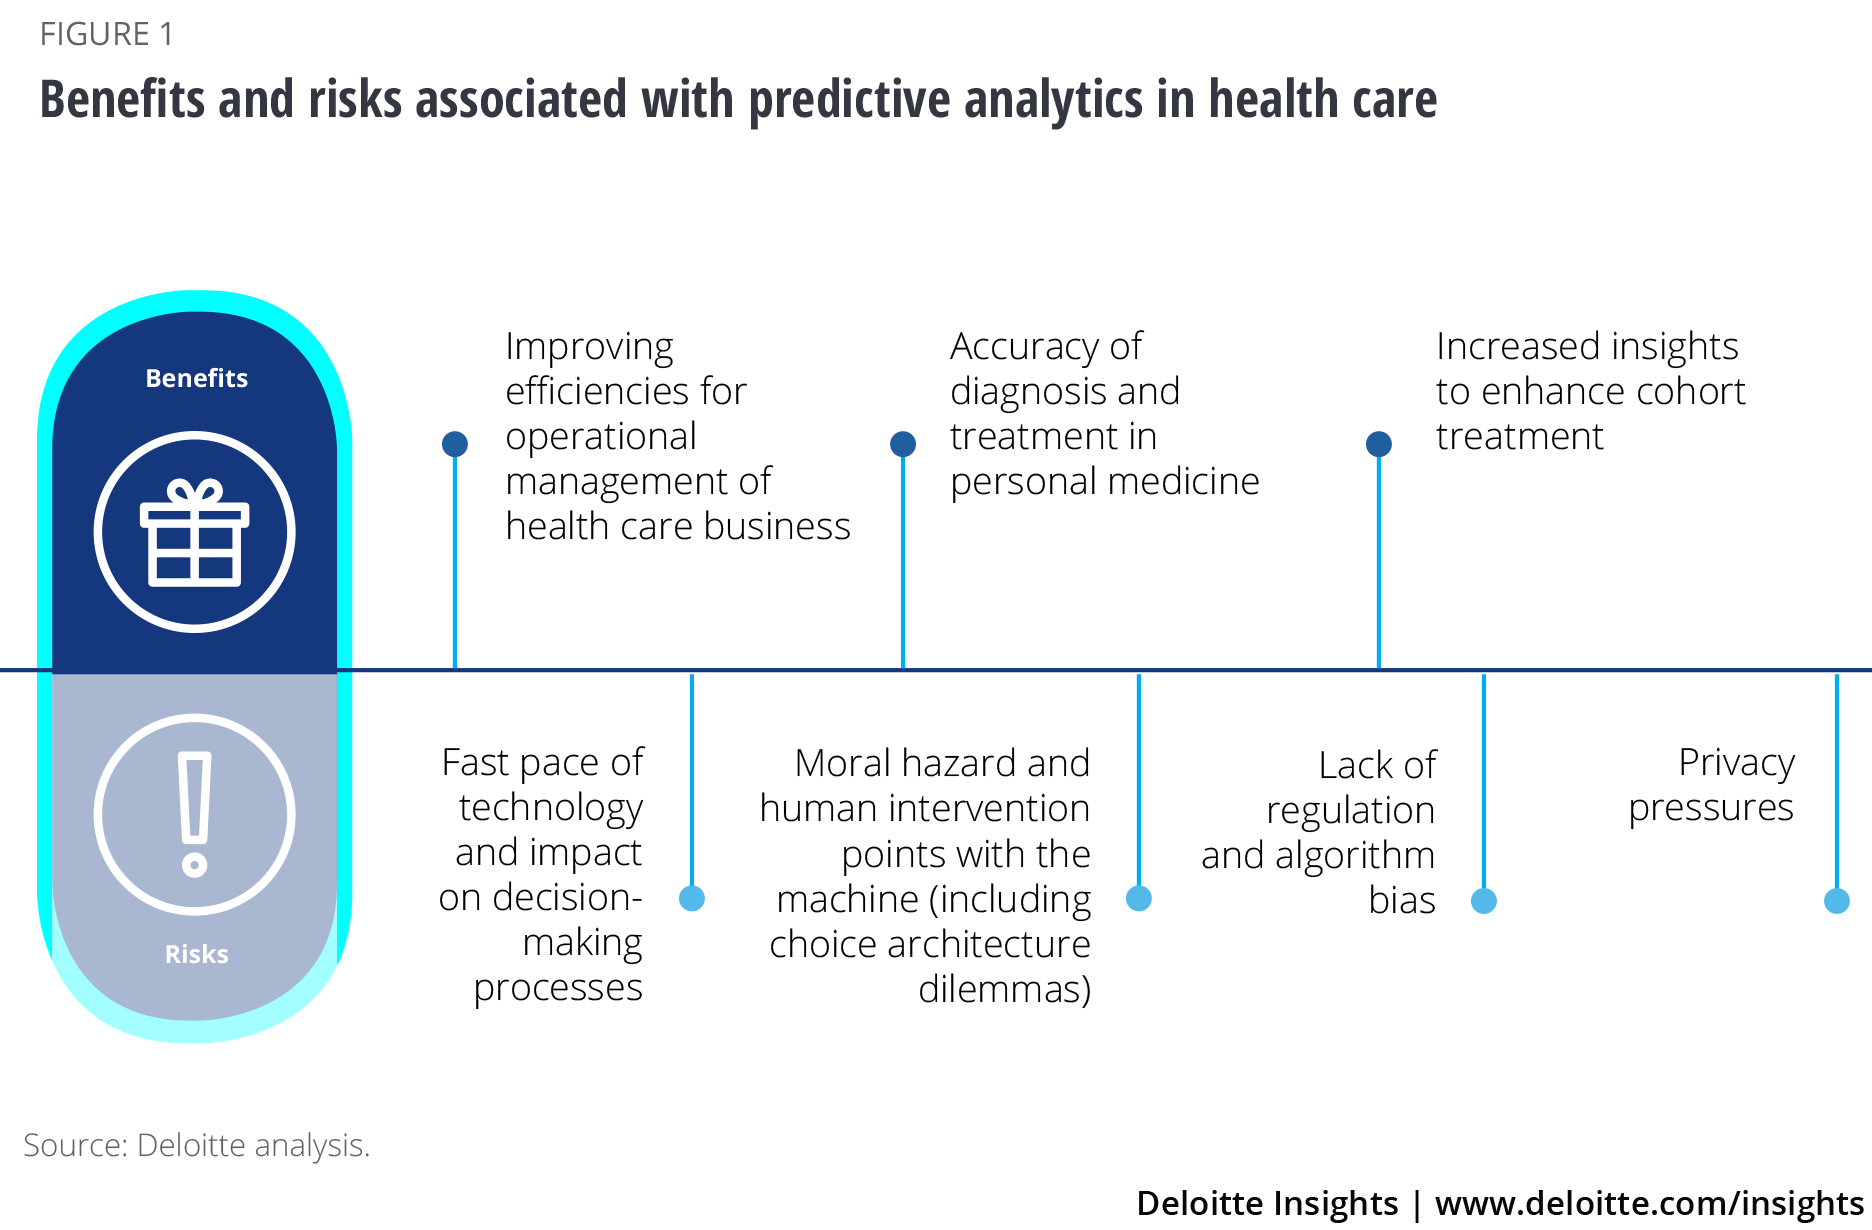 Benefits and risks associated with predictive analytics in health care